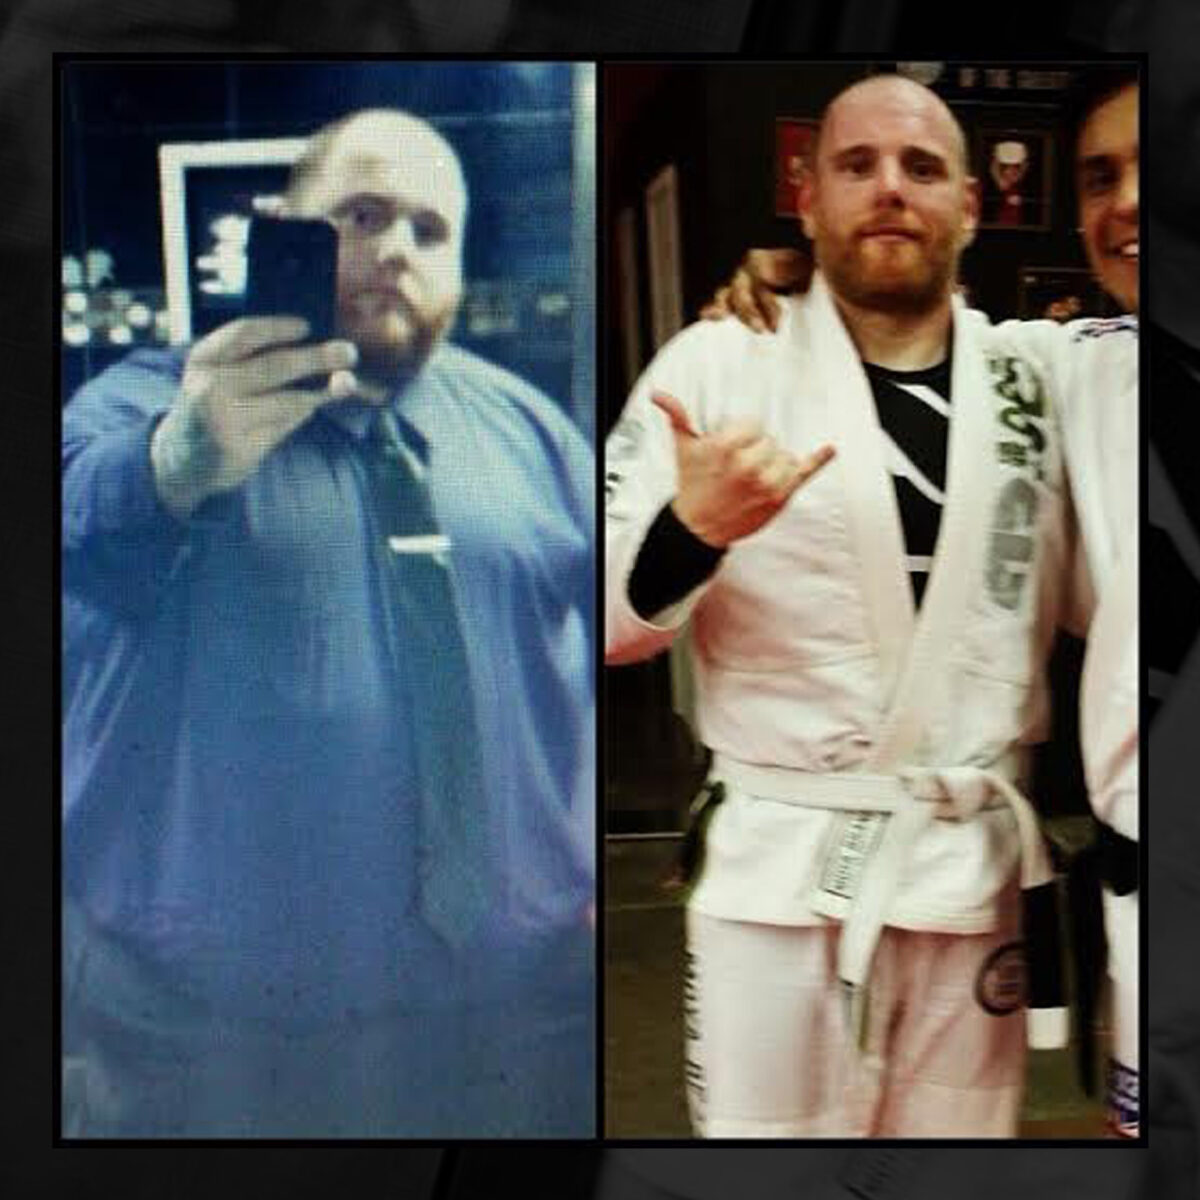 9 Reasons Why BJJ Can Give You A Good Workout